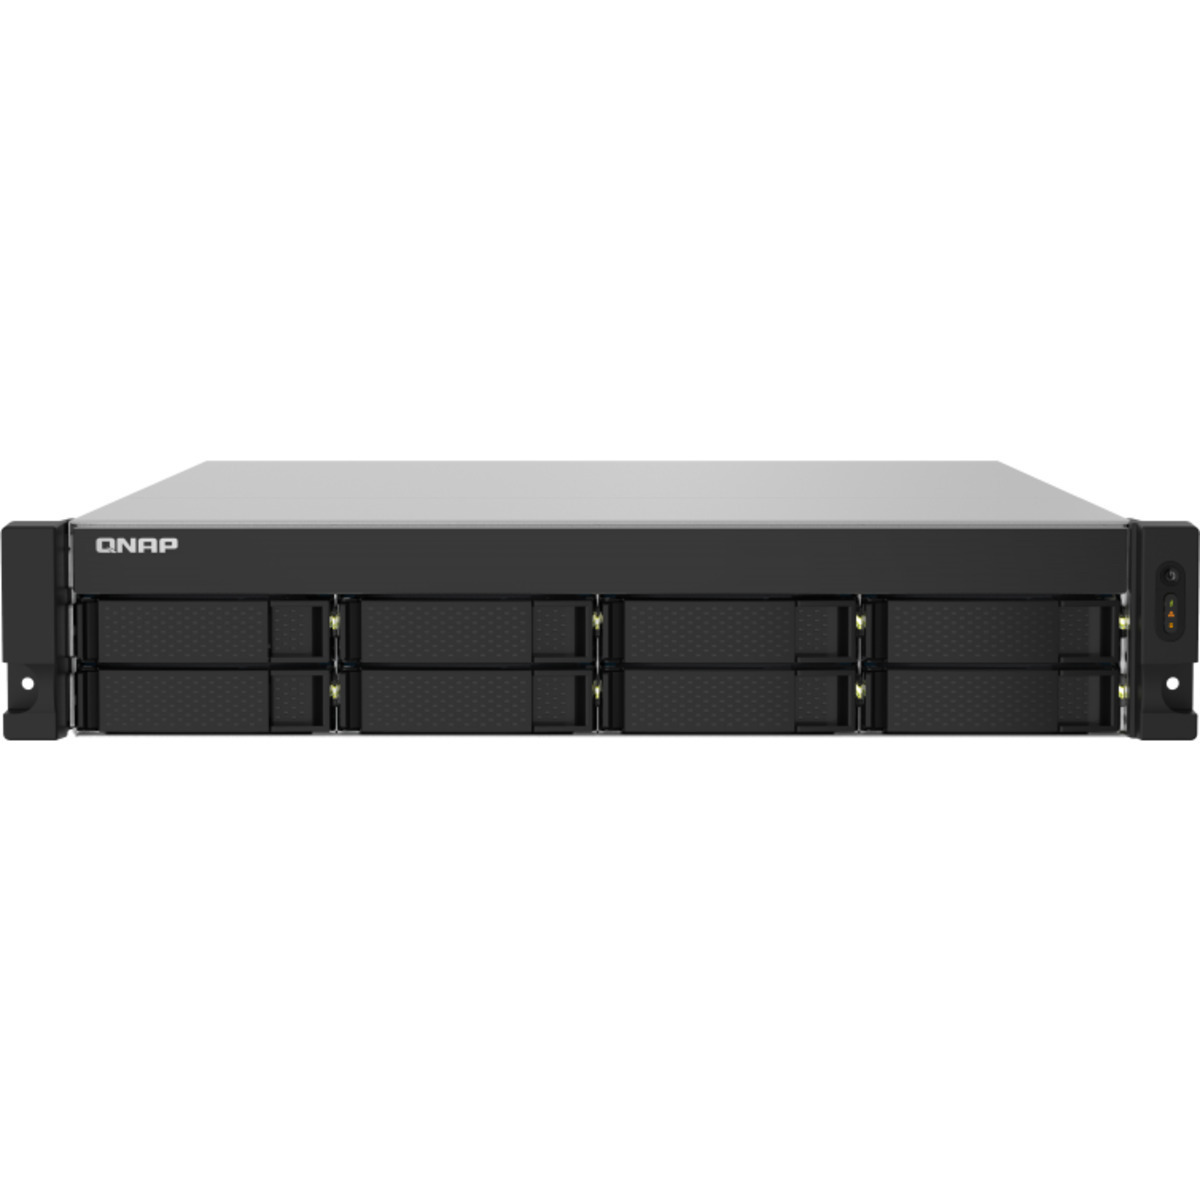 QNAP TS-832PXU 64tb 8-Bay RackMount Personal / Basic Home / Small Office NAS - Network Attached Storage Device 4x16tb Seagate IronWolf Pro ST16000NT001 3.5 7200rpm SATA 6Gb/s HDD NAS Class Drives Installed - Burn-In Tested - ON SALE - FREE RAM UPGRADE TS-832PXU